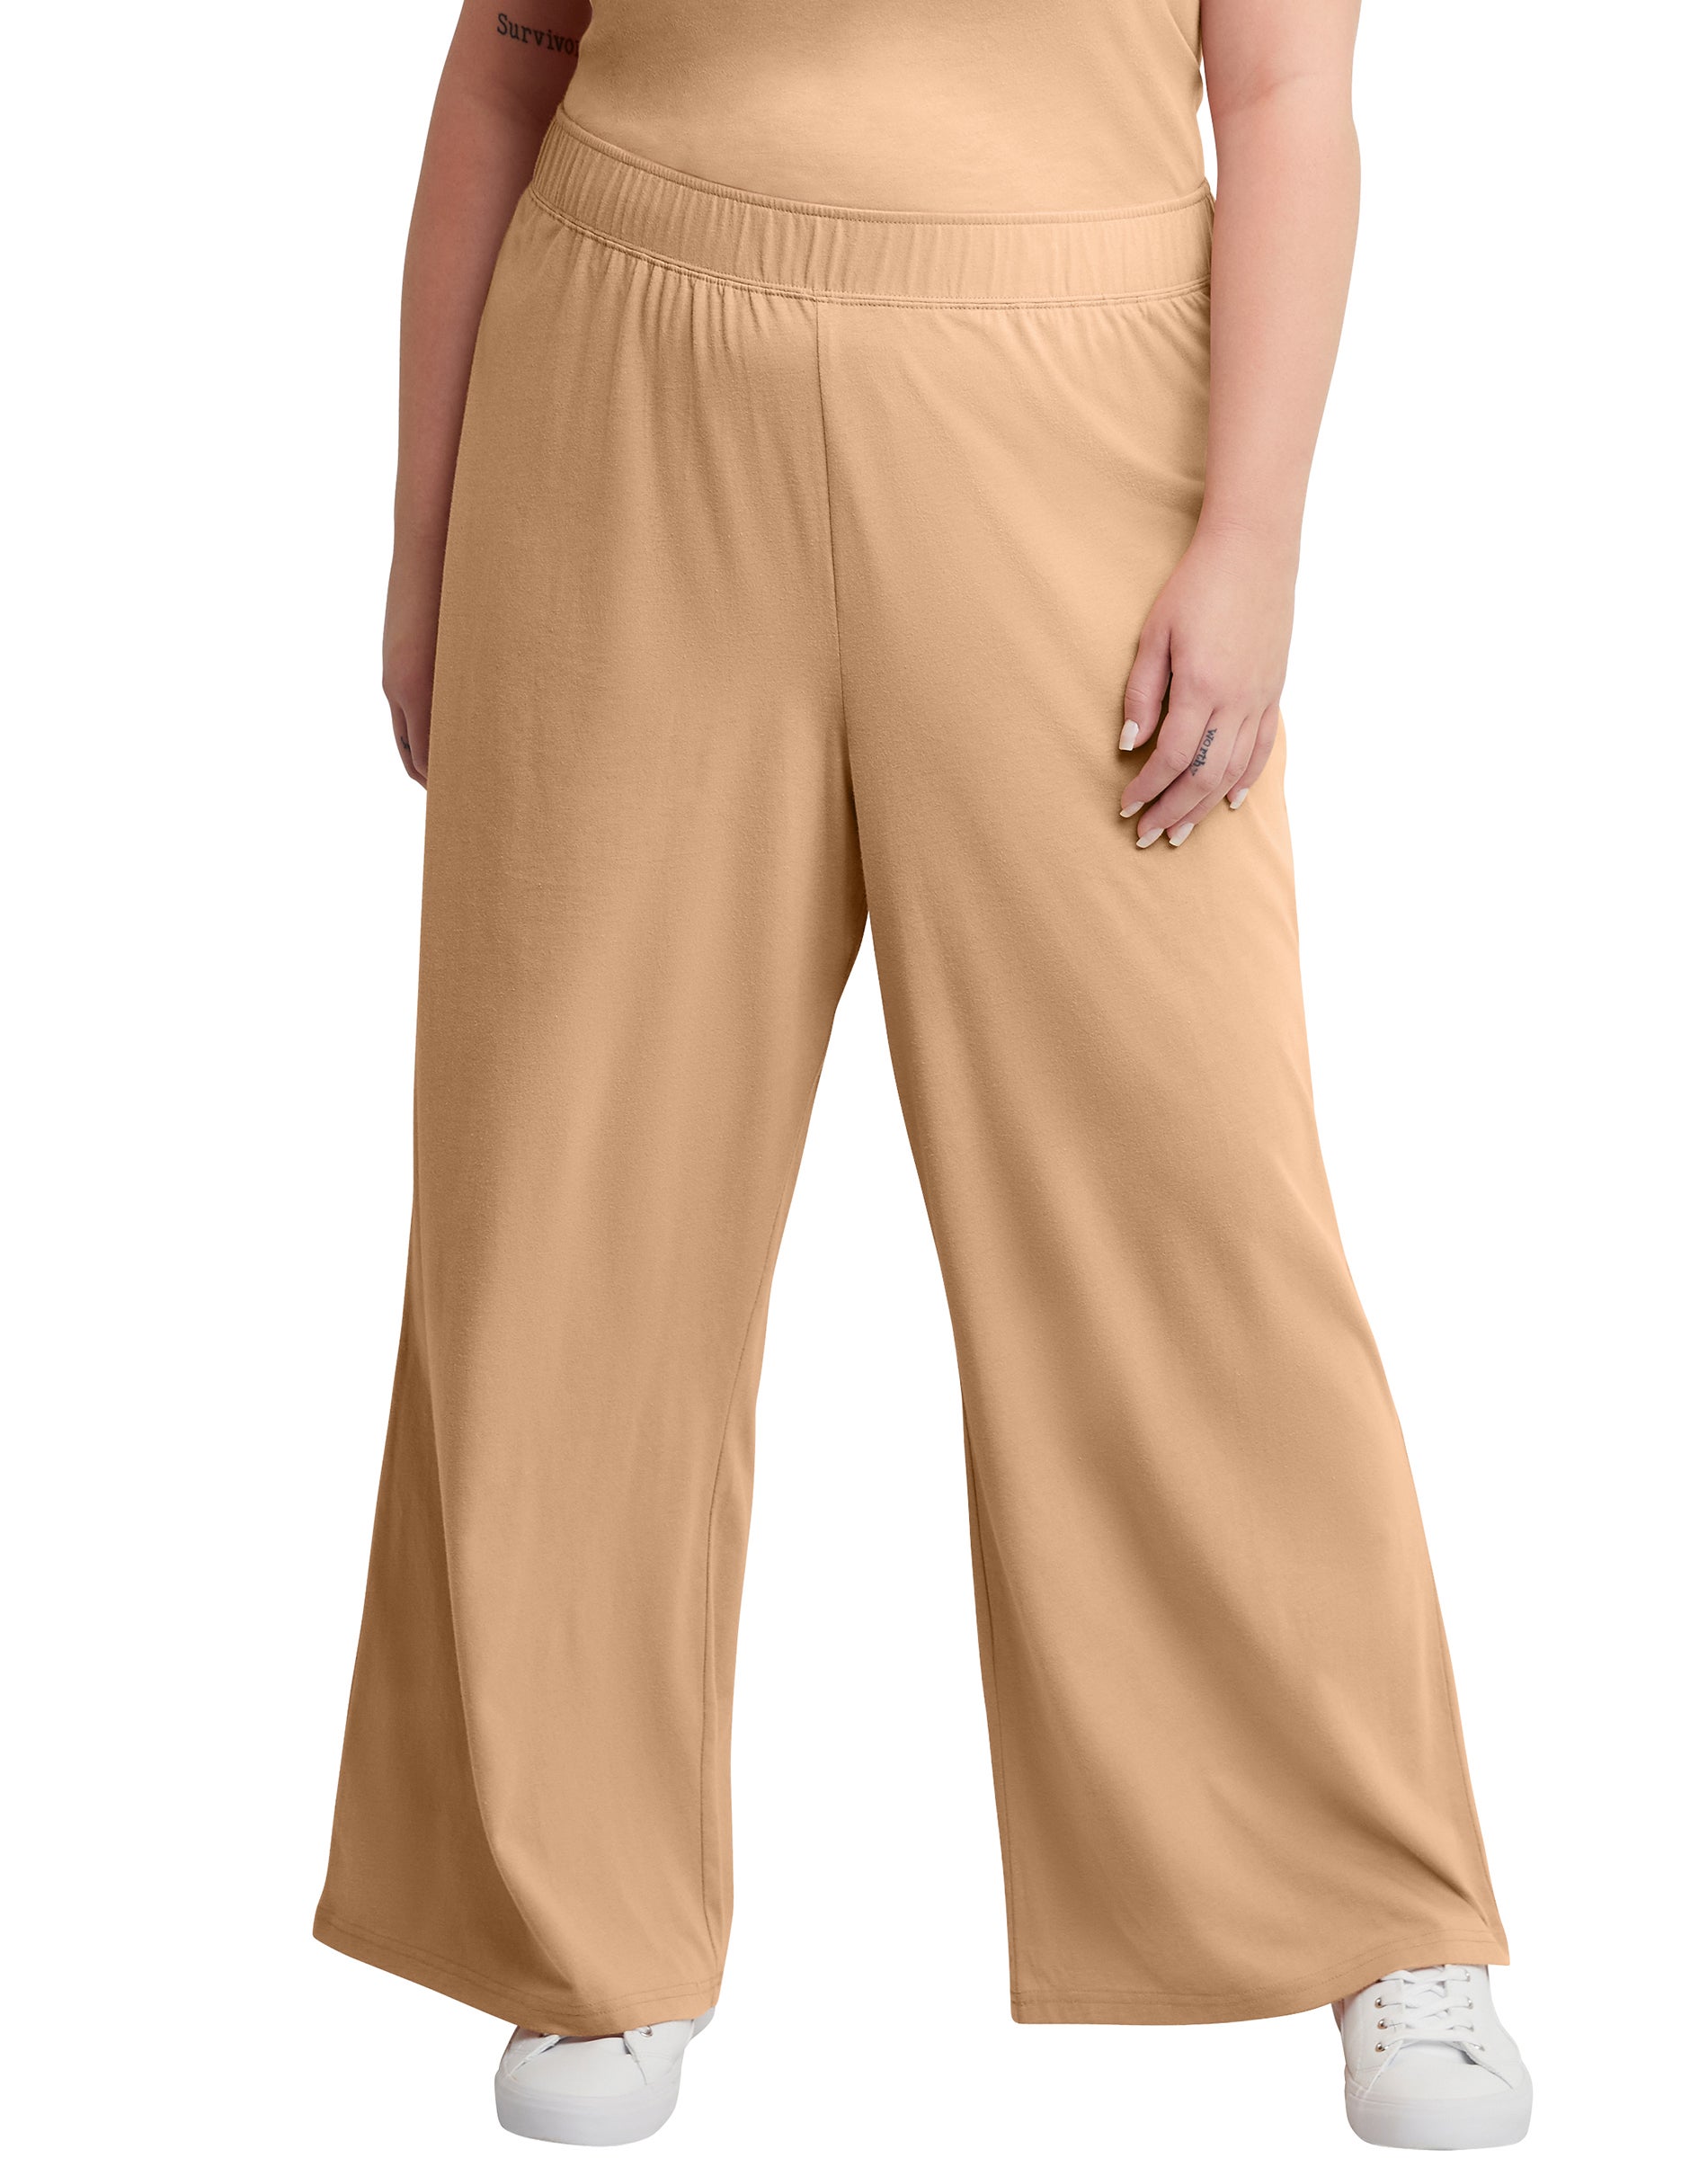 Women’s plus size khaki pants: Style and Comfort Combined插图4